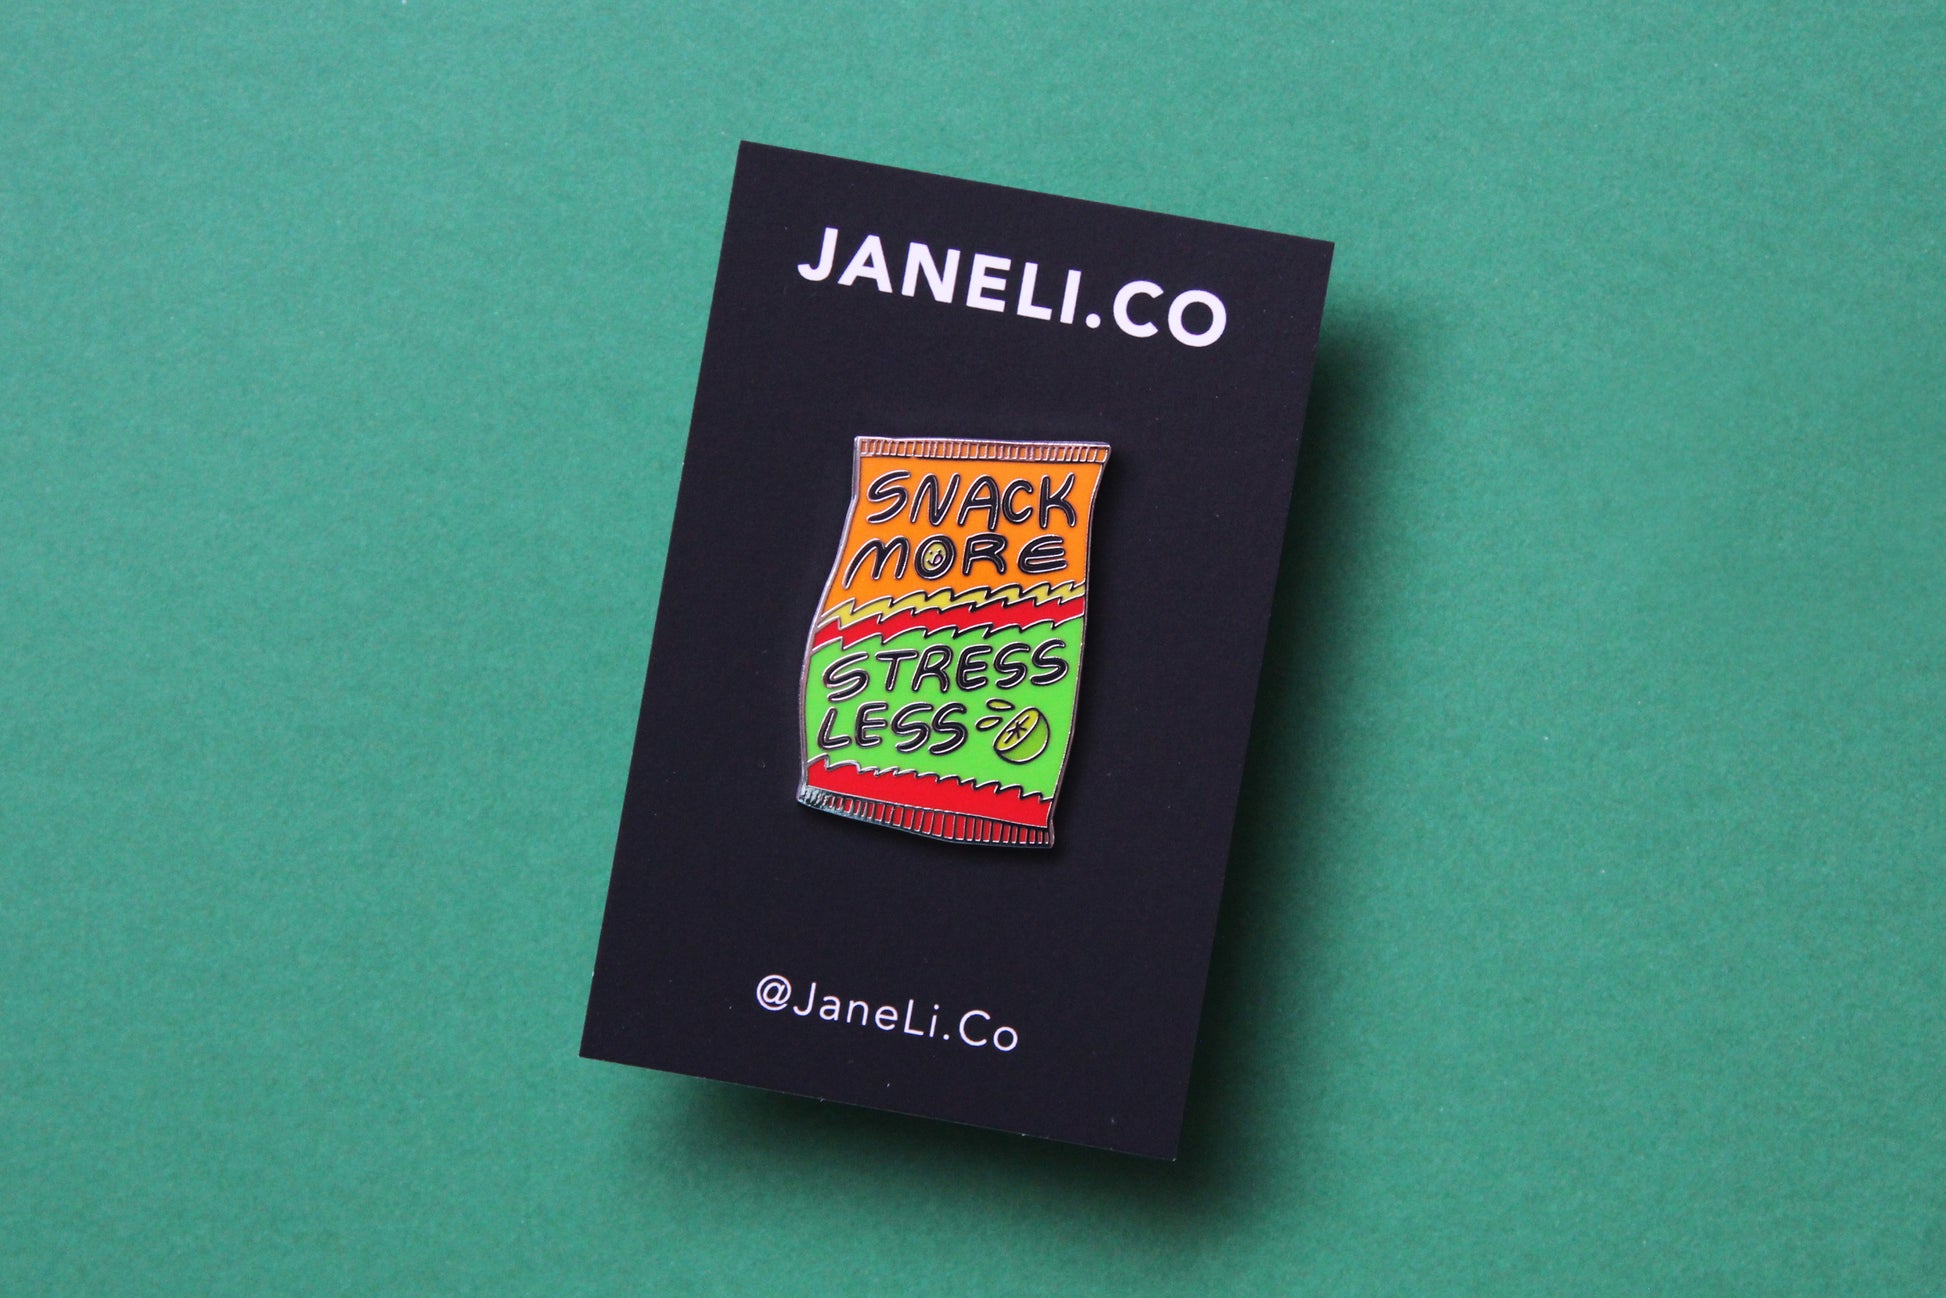 An enamel pin showing a chip bag that says "Snack More Stress Less" on a black JaneLi.Co backing card over a green background.